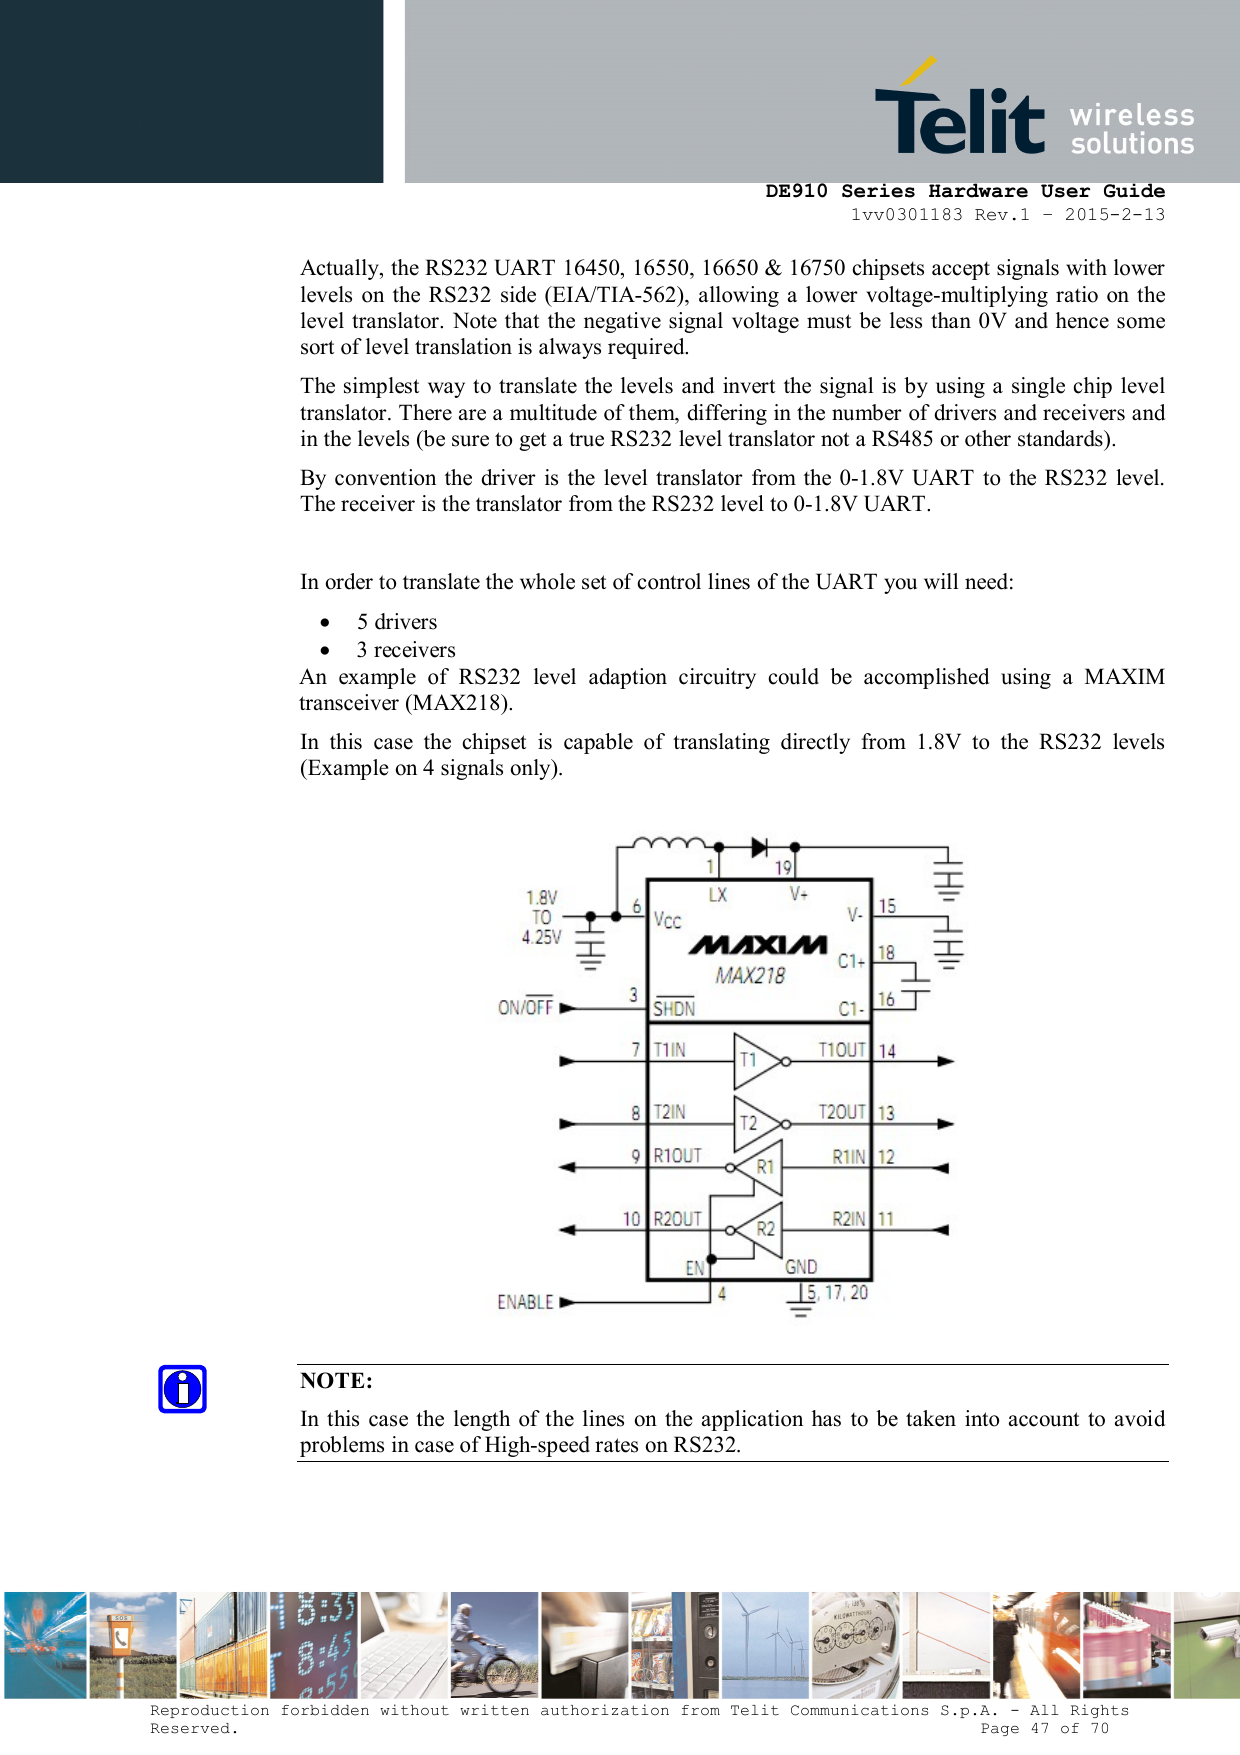      DE910 Series Hardware User Guide 1vv0301183 Rev.1 – 2015-2-13 Reproduction forbidden without written authorization from Telit Communications S.p.A. - All Rights Reserved.                                                                          Page 47 of 70 Actually, the RS232 UART 16450, 16550, 16650 &amp; 16750 chipsets accept signals with lower levels  on  the  RS232  side  (EIA/TIA-562),  allowing a lower  voltage-multiplying  ratio on  the level  translator. Note that the negative  signal voltage must be  less  than 0V and hence some sort of level translation is always required.  The simplest way  to translate the levels and  invert the signal is  by using  a single chip level translator. There are a multitude of them, differing in the number of drivers and receivers and in the levels (be sure to get a true RS232 level translator not a RS485 or other standards). By  convention  the  driver  is  the  level translator  from  the 0-1.8V UART  to the RS232  level. The receiver is the translator from the RS232 level to 0-1.8V UART.  In order to translate the whole set of control lines of the UART you will need:  5 drivers  3 receivers An  example  of  RS232  level  adaption  circuitry  could  be  accomplished  using  a  MAXIM transceiver (MAX218).  In  this  case  the  chipset  is  capable  of  translating  directly  from  1.8V  to  the  RS232  levels (Example on 4 signals only).    NOTE: In  this case the  length  of  the lines  on the application  has  to  be  taken  into  account to  avoid problems in case of High-speed rates on RS232.    